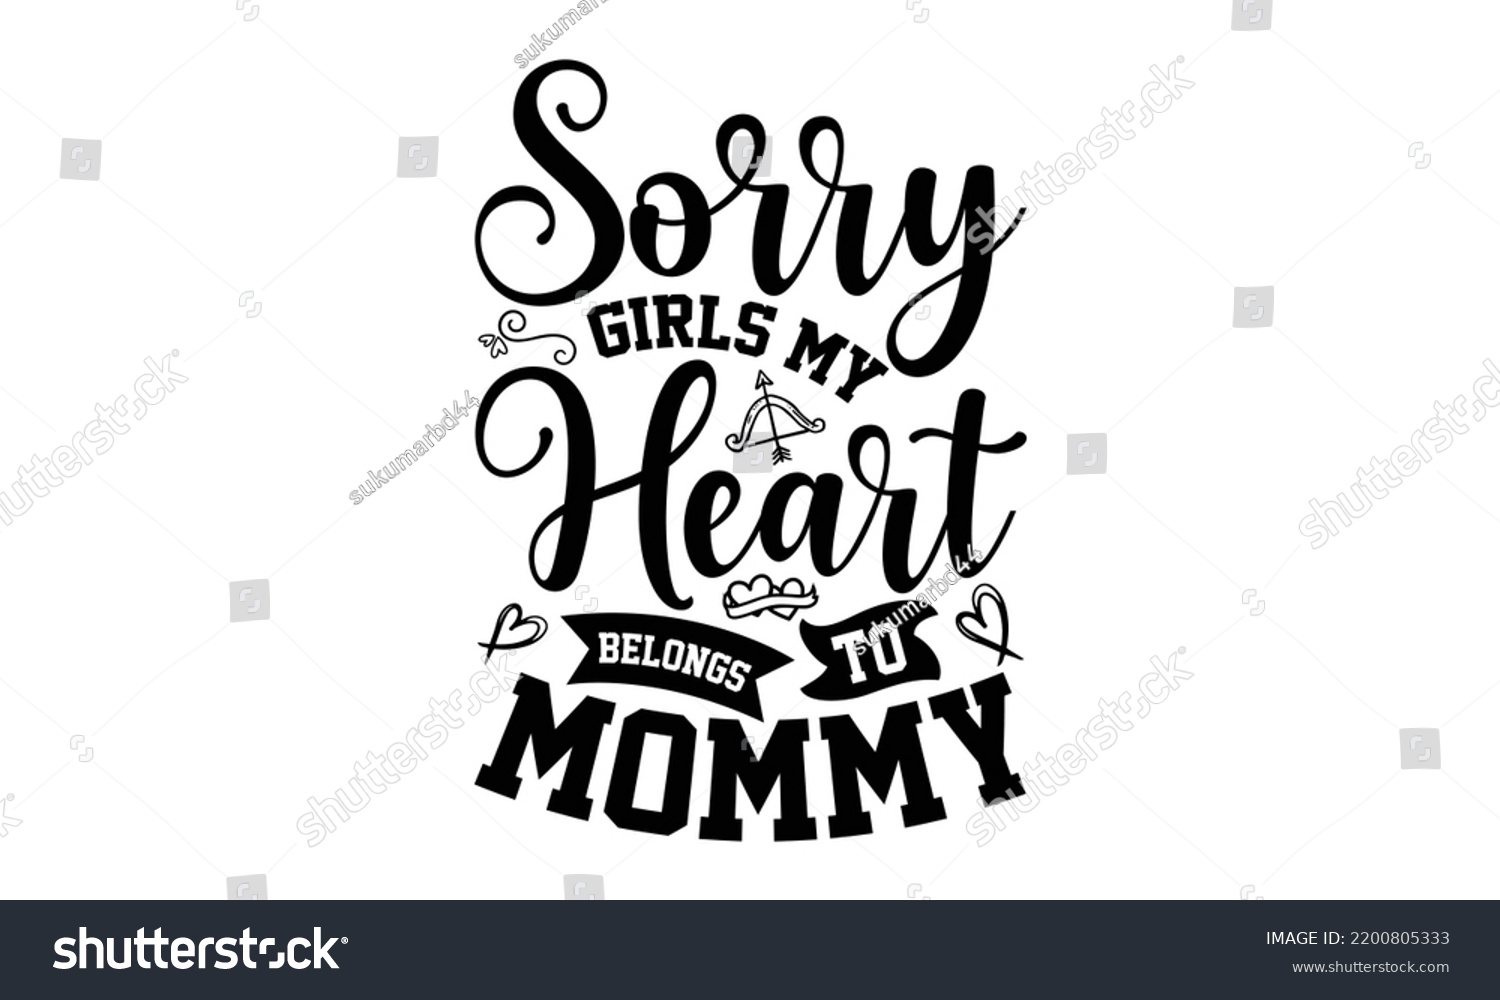 SVG of Sorry Girls My Heart Belongs To Mommy - Valentine's Day t shirt design, Hand drawn lettering phrase, calligraphy vector illustration, eps, svg isolated Files for Cutting svg